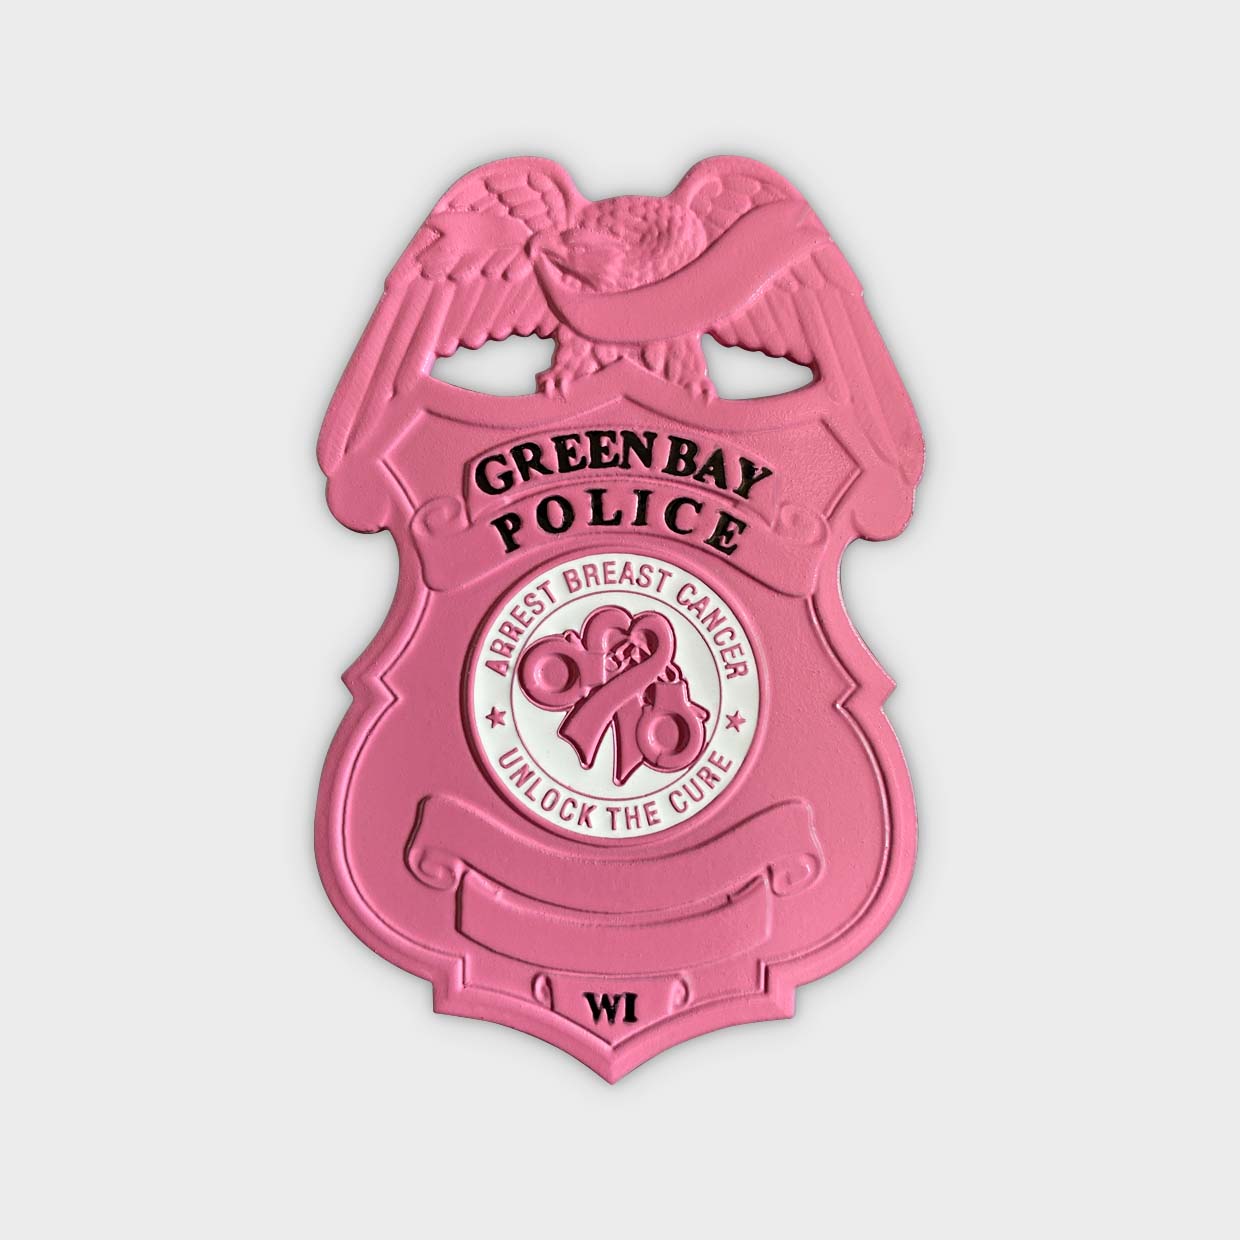 Green Bay Police Breast Cancer Badge